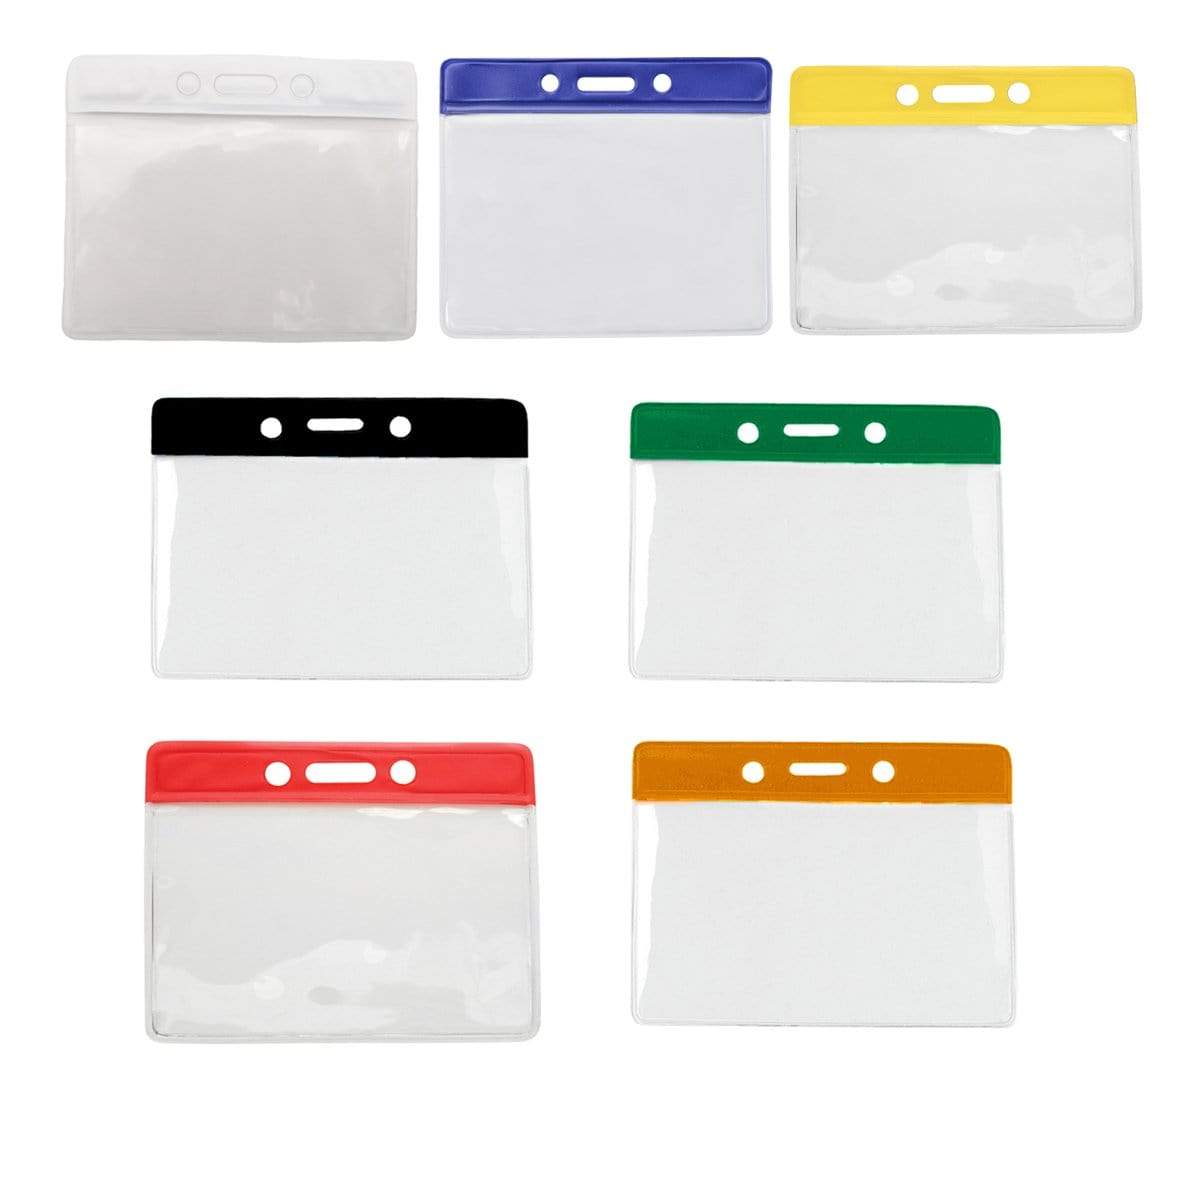 Horizontal Vinyl Badge Holder with Color Bar Top - Great for Color Coding Access and ID (1820-100X)